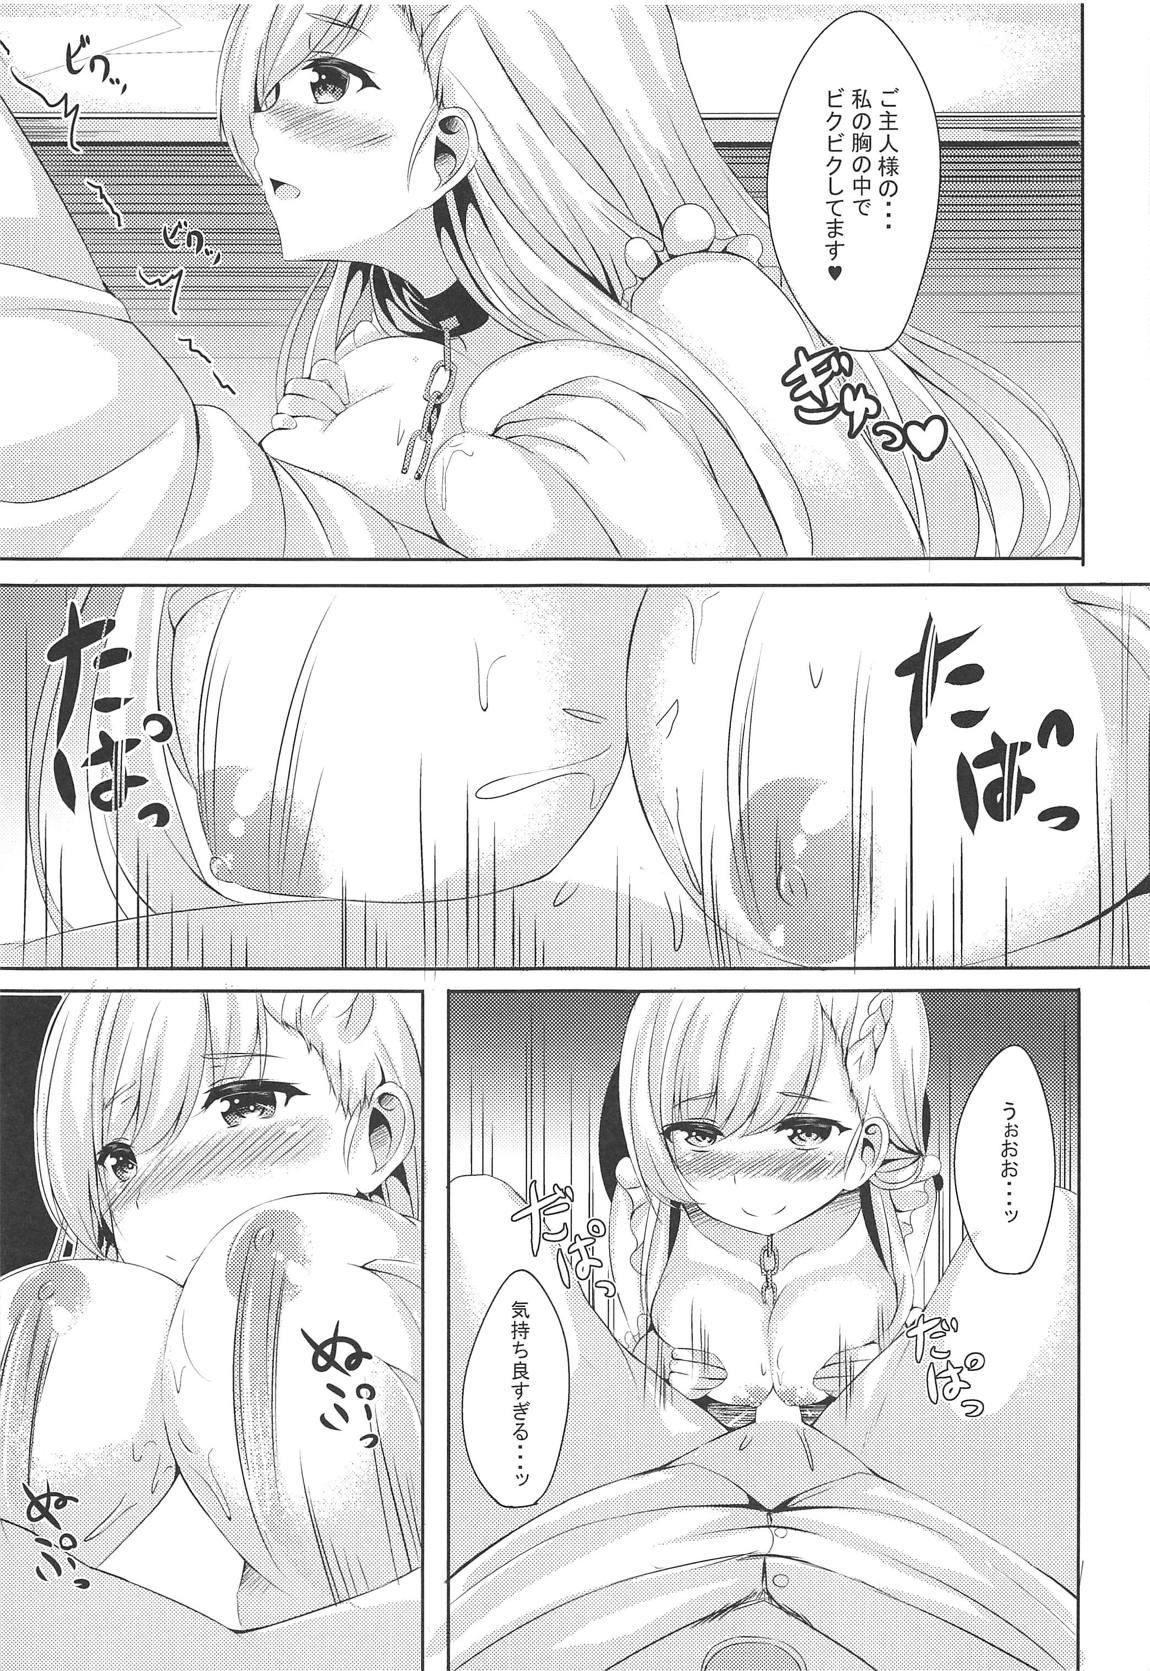 Jap ring the bell - Azur lane Gay Black - Page 11